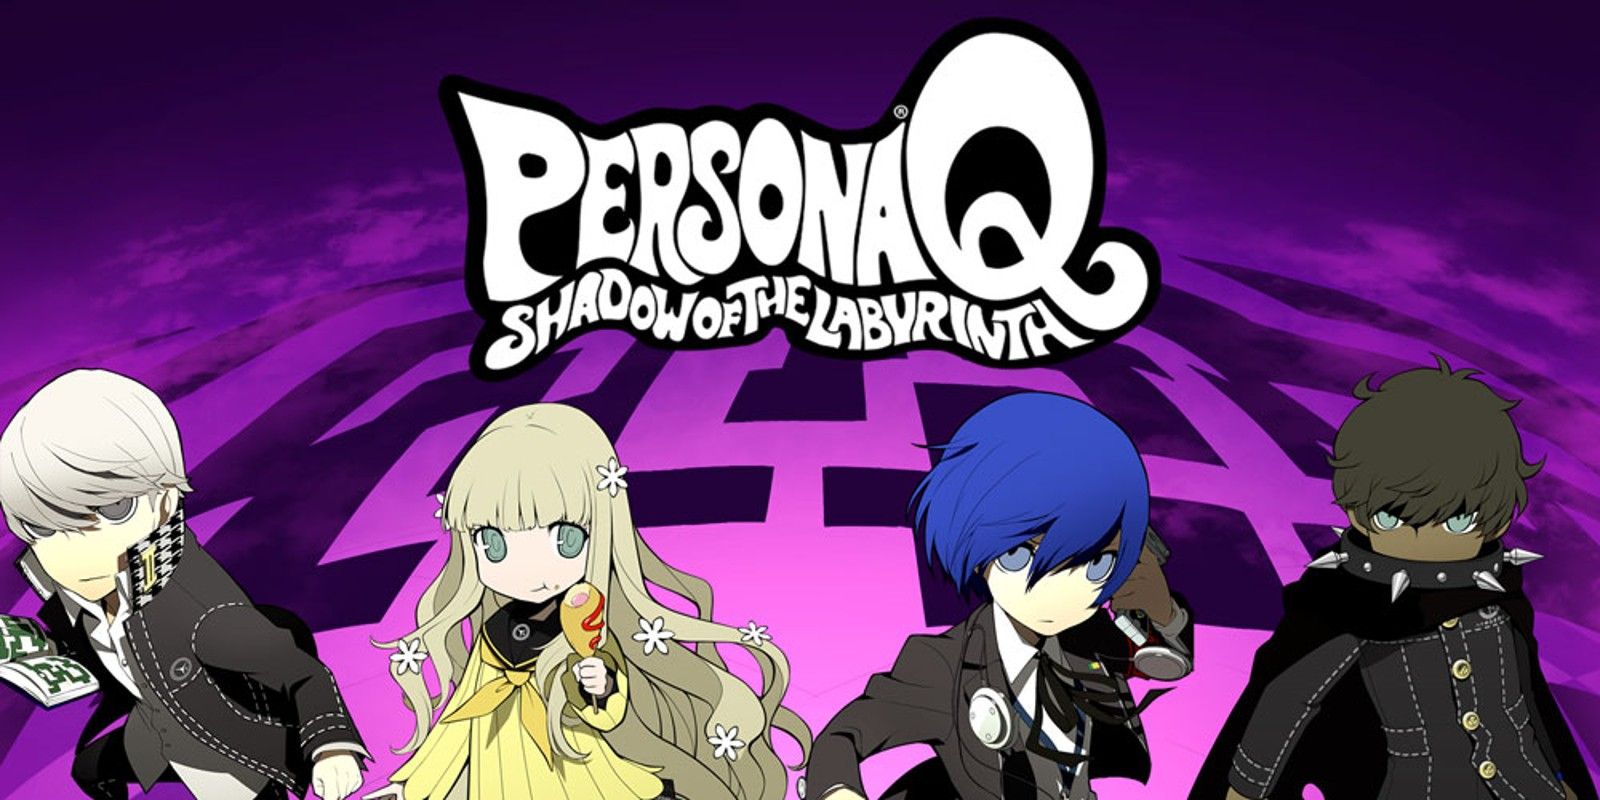 An image of promotional art for Persona Q